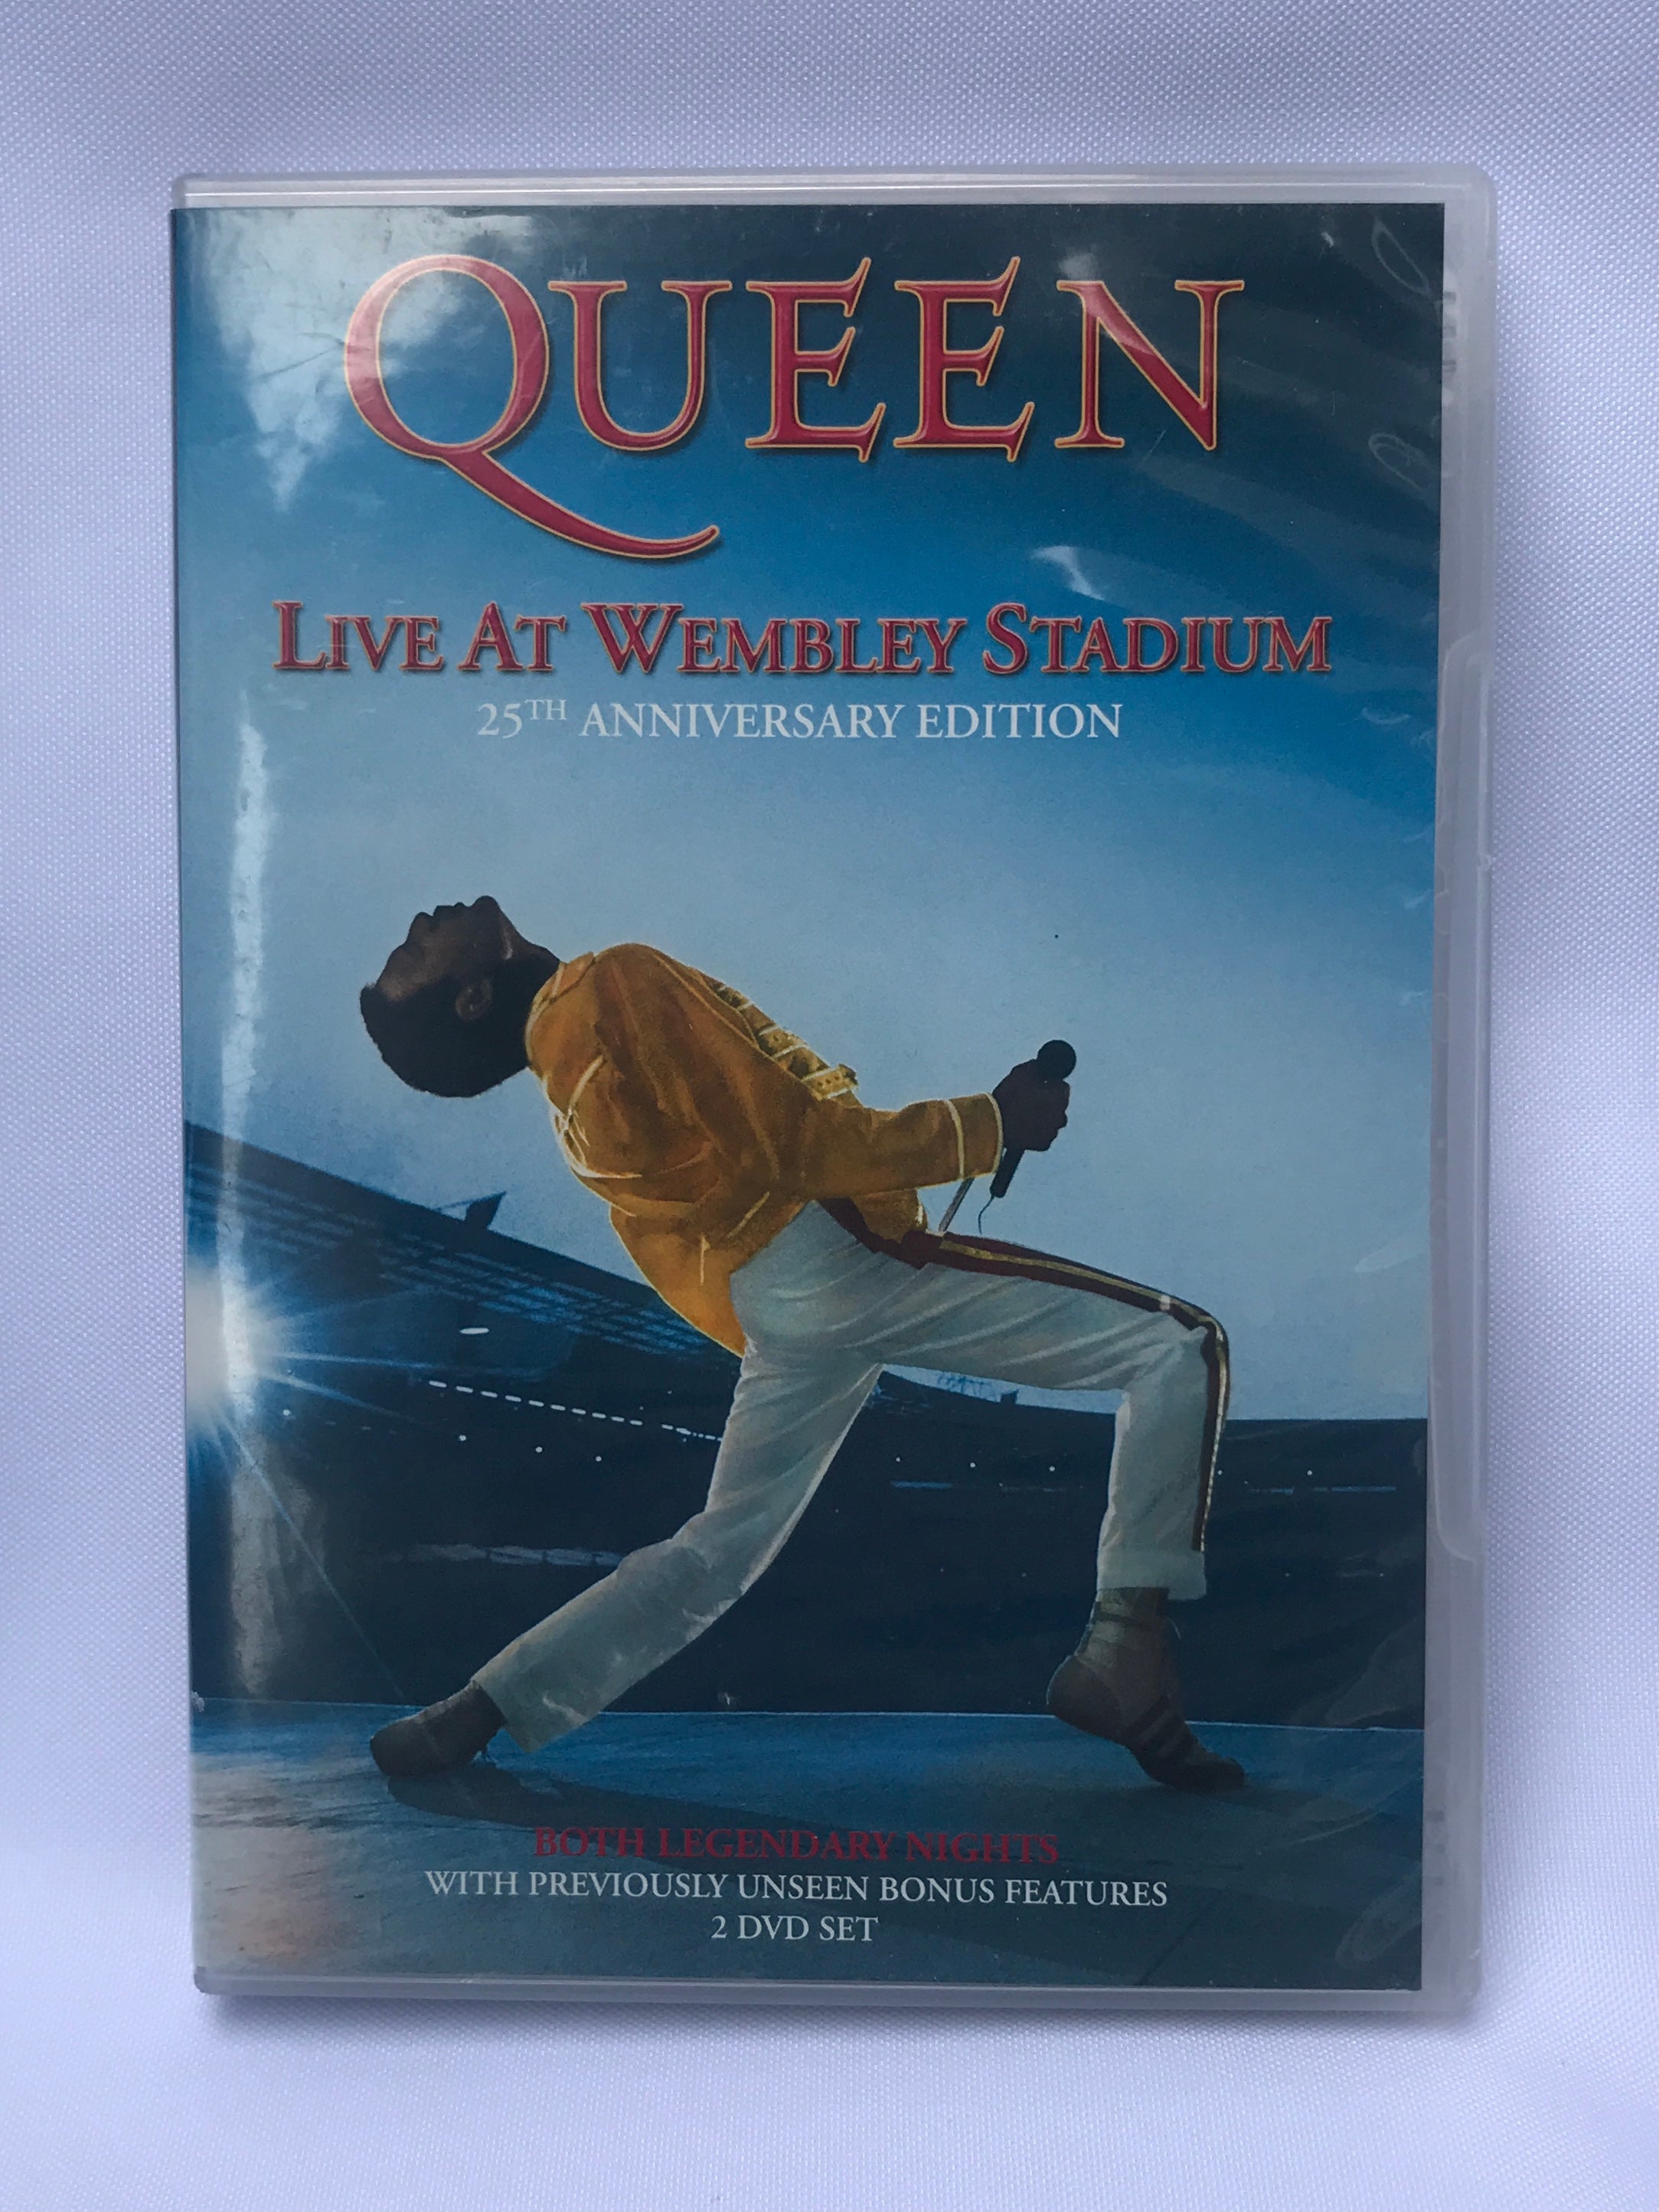 Queen - at Wembley Stadium 25th Anniversary Edition - Used – Records